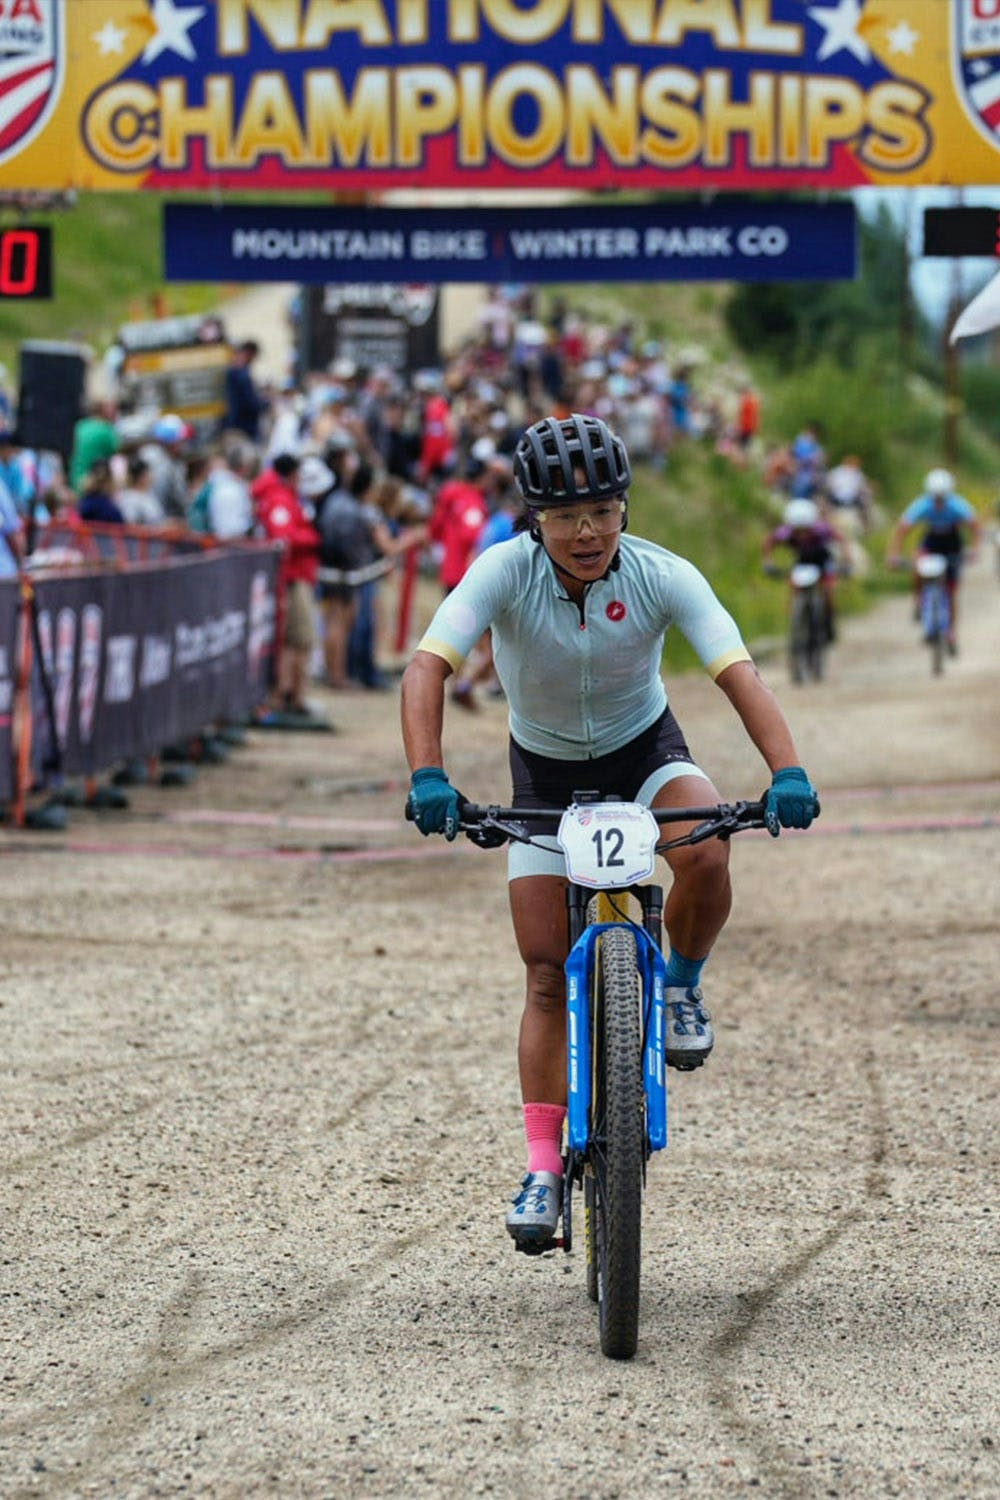 Juliana Bicycles Pro XC Rider - Evelyn Dong crossing the finish line